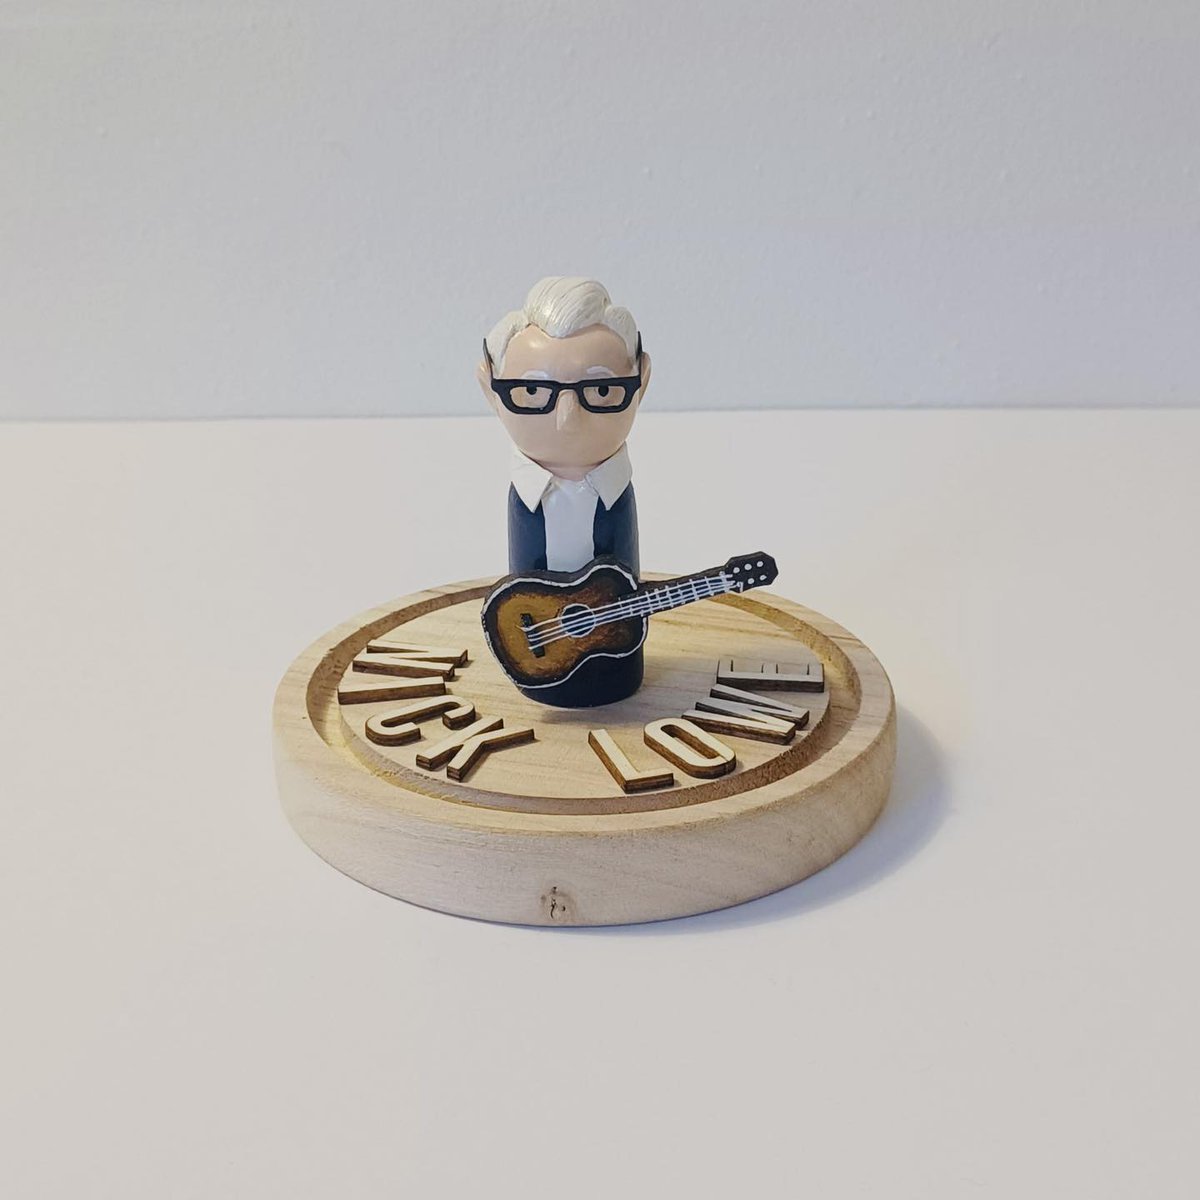 Check out these unique figurines of Justin & Iain, alongside treasured singer-songwriter Nick Lowe, that were created for the @folkinthepark1 festival this summer. They’re being auctioned off for the benefit of @soundloungeCIC. More info here: jumblebee.co.uk/uniquenicklowe…